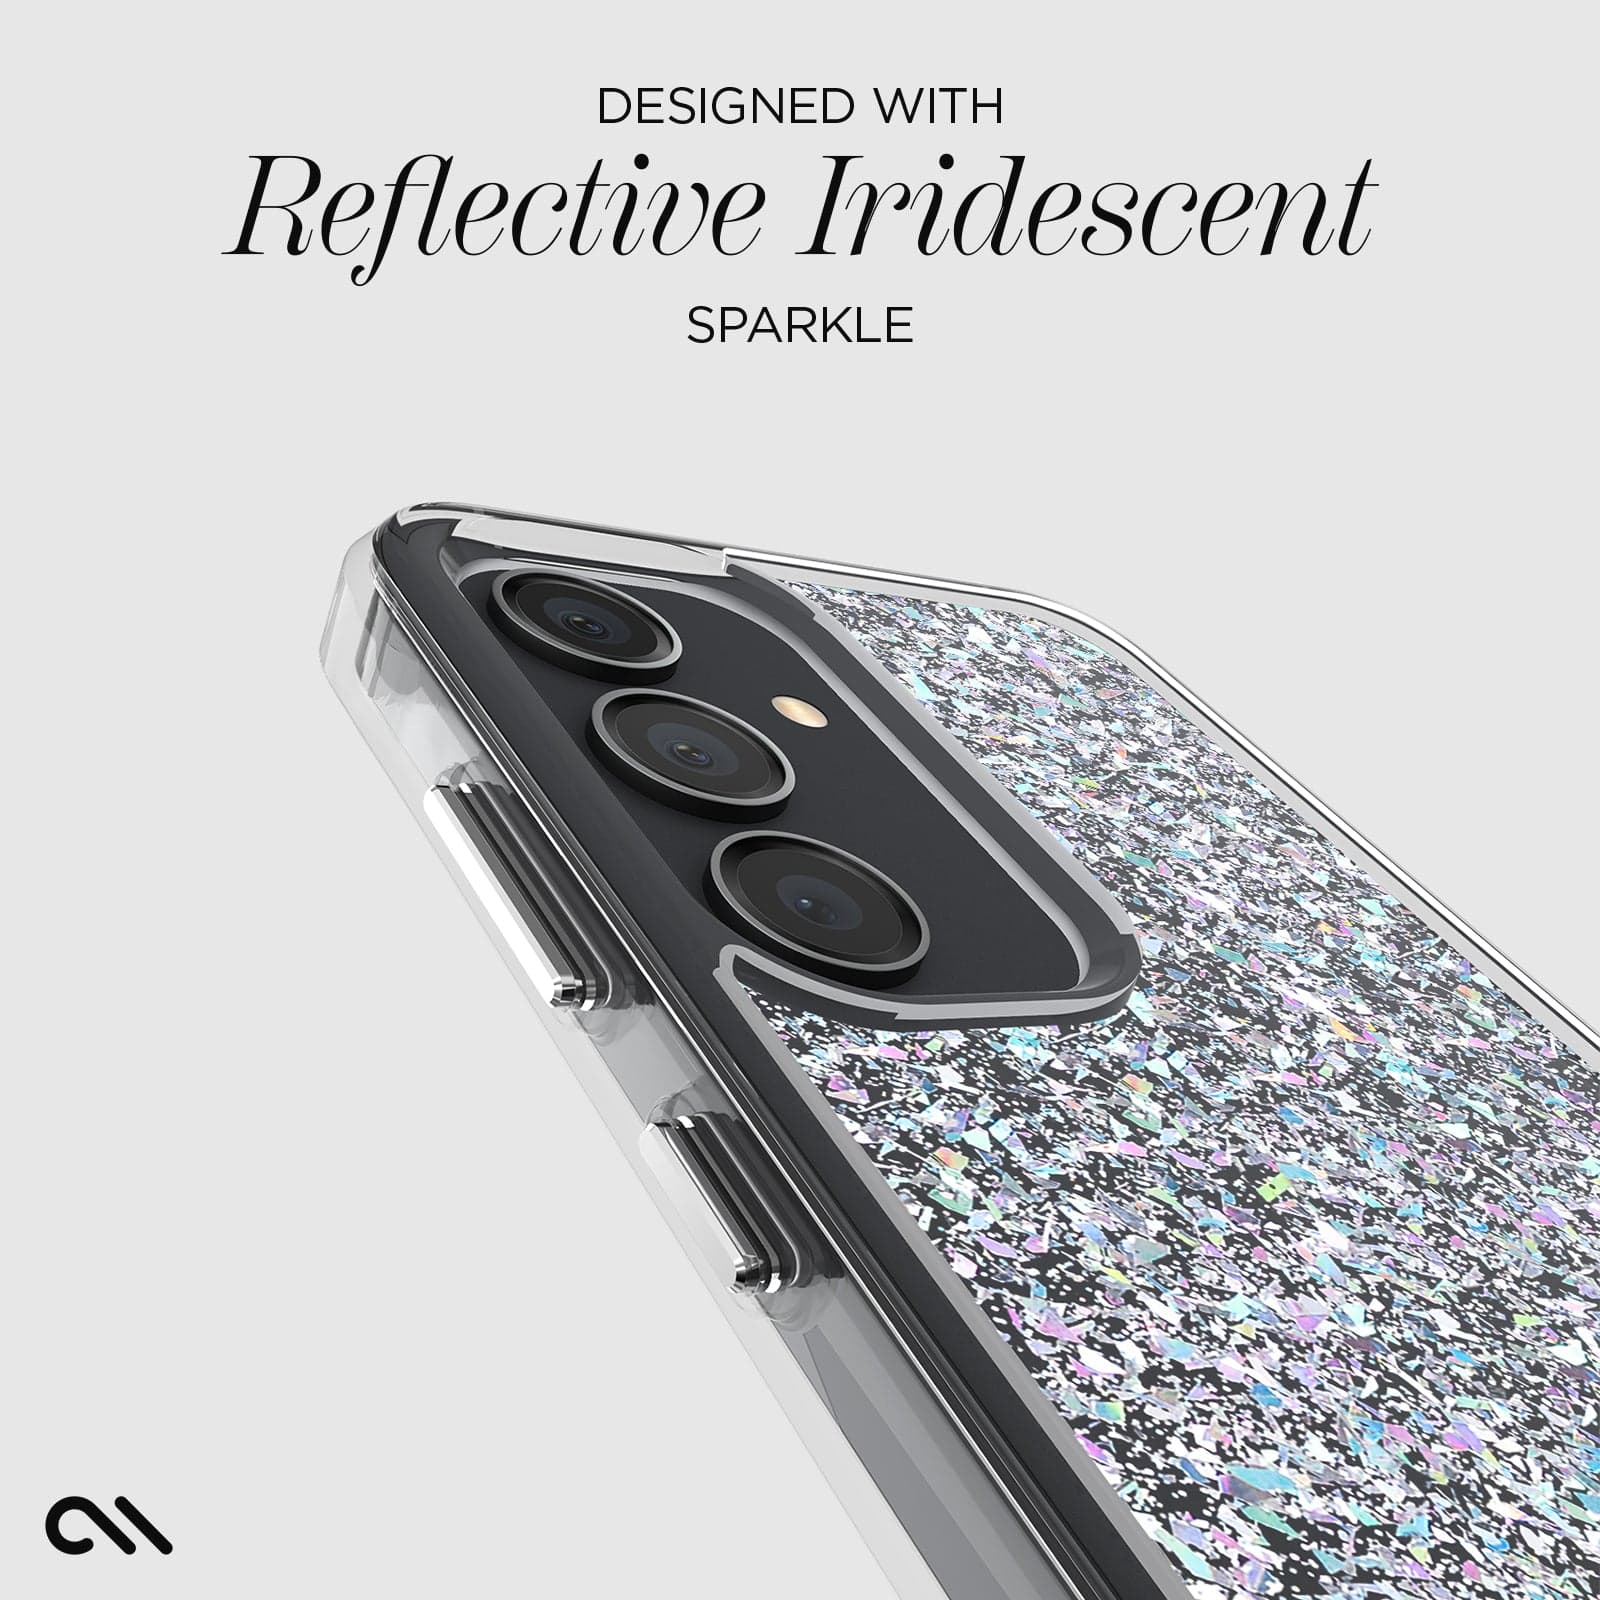 DESIGNED WITH REFLECTIVE IRIDESCENT SPARKLE